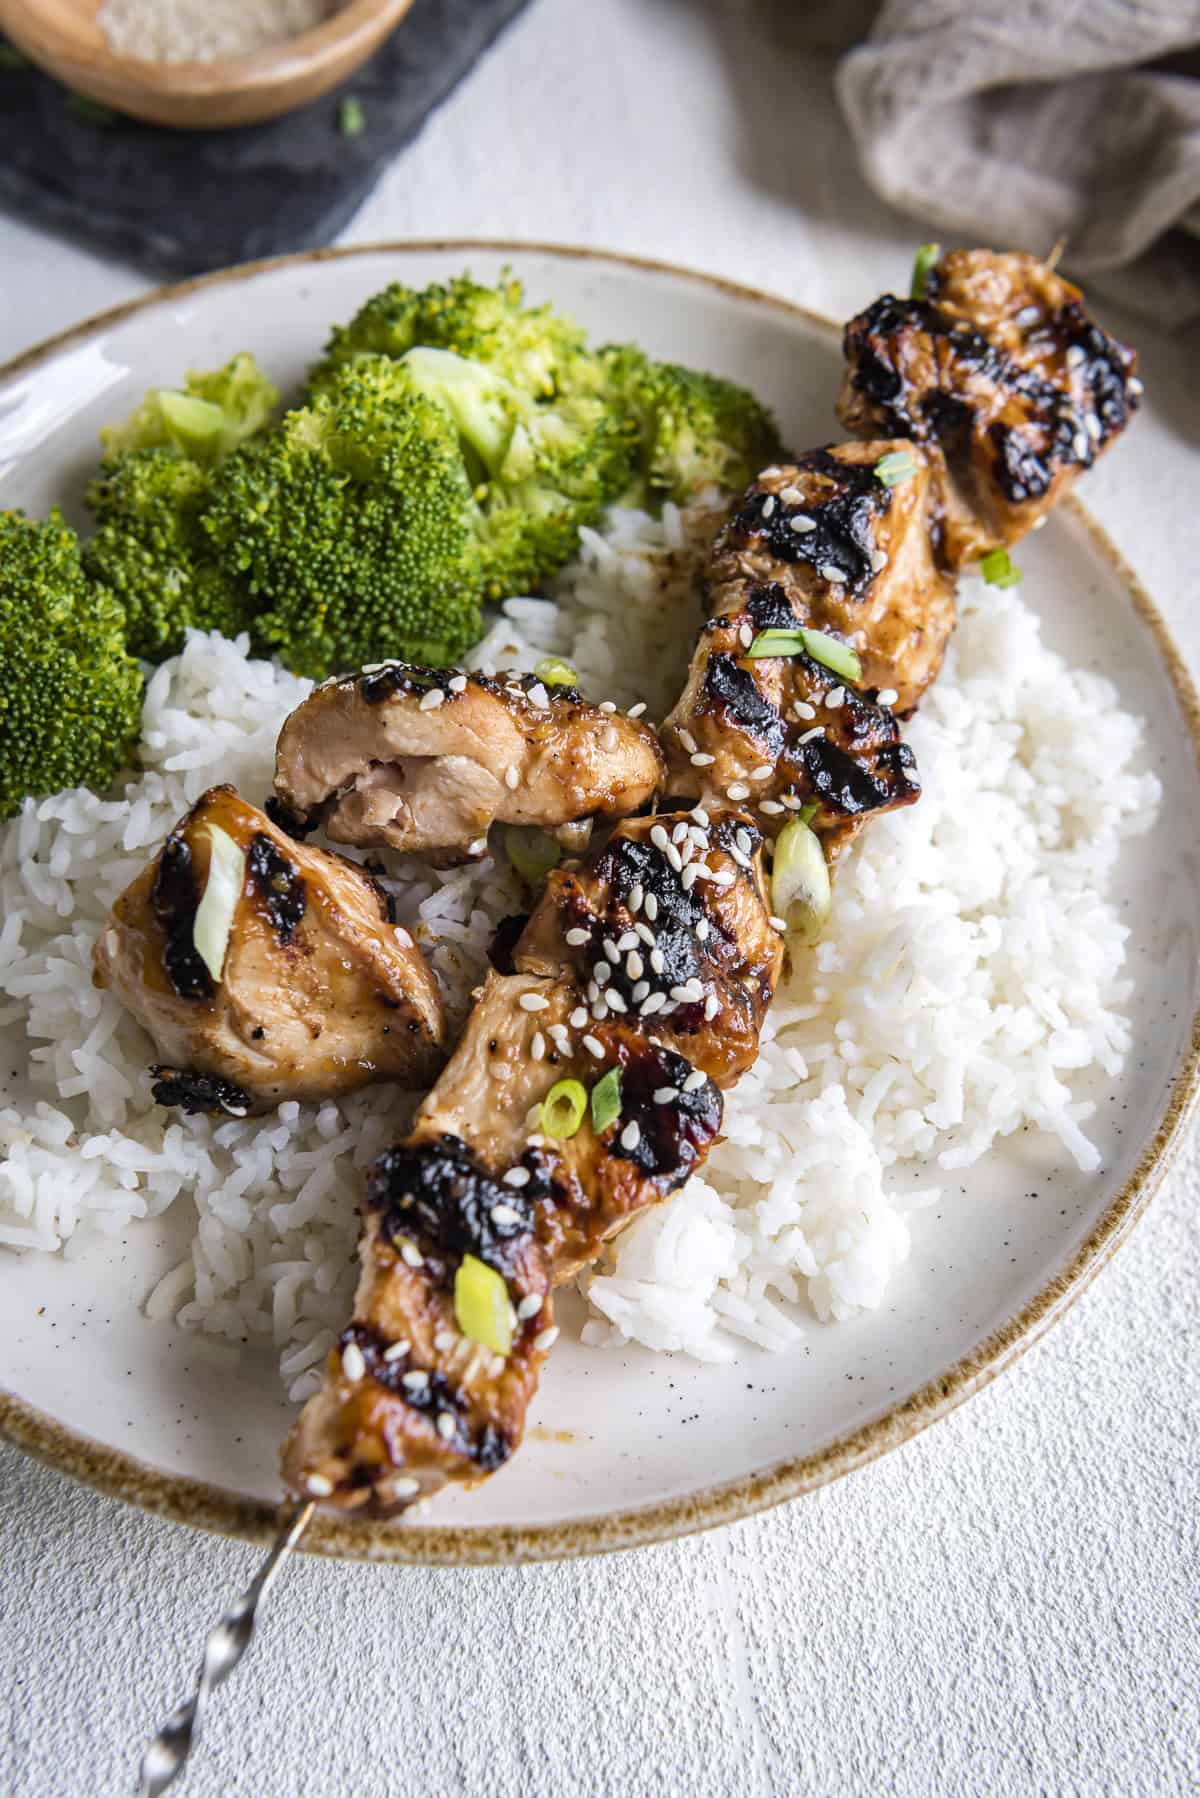 a grilled teriyaki chicken skewer on a plate of rice with broccoli